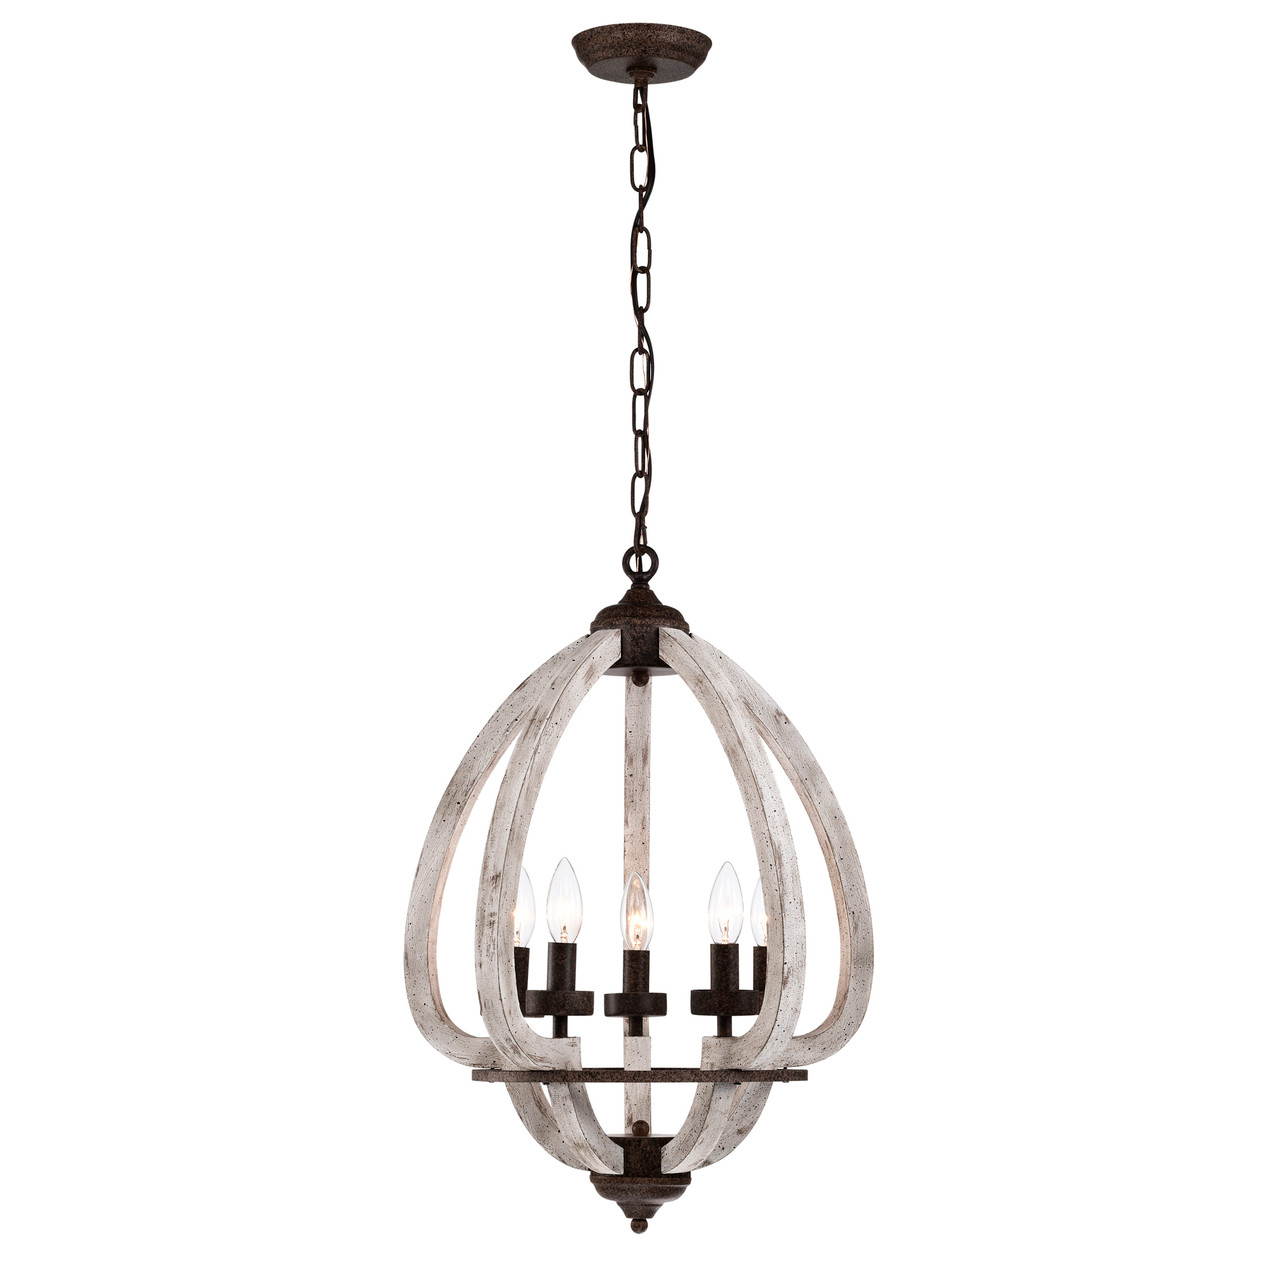 WAREHOUSE OF TIFFANY'S IMP862/5 Nelly 18 in. 5-Light Indoor Rustic Brown and Weathered White Finish Chandelier with Light Kit